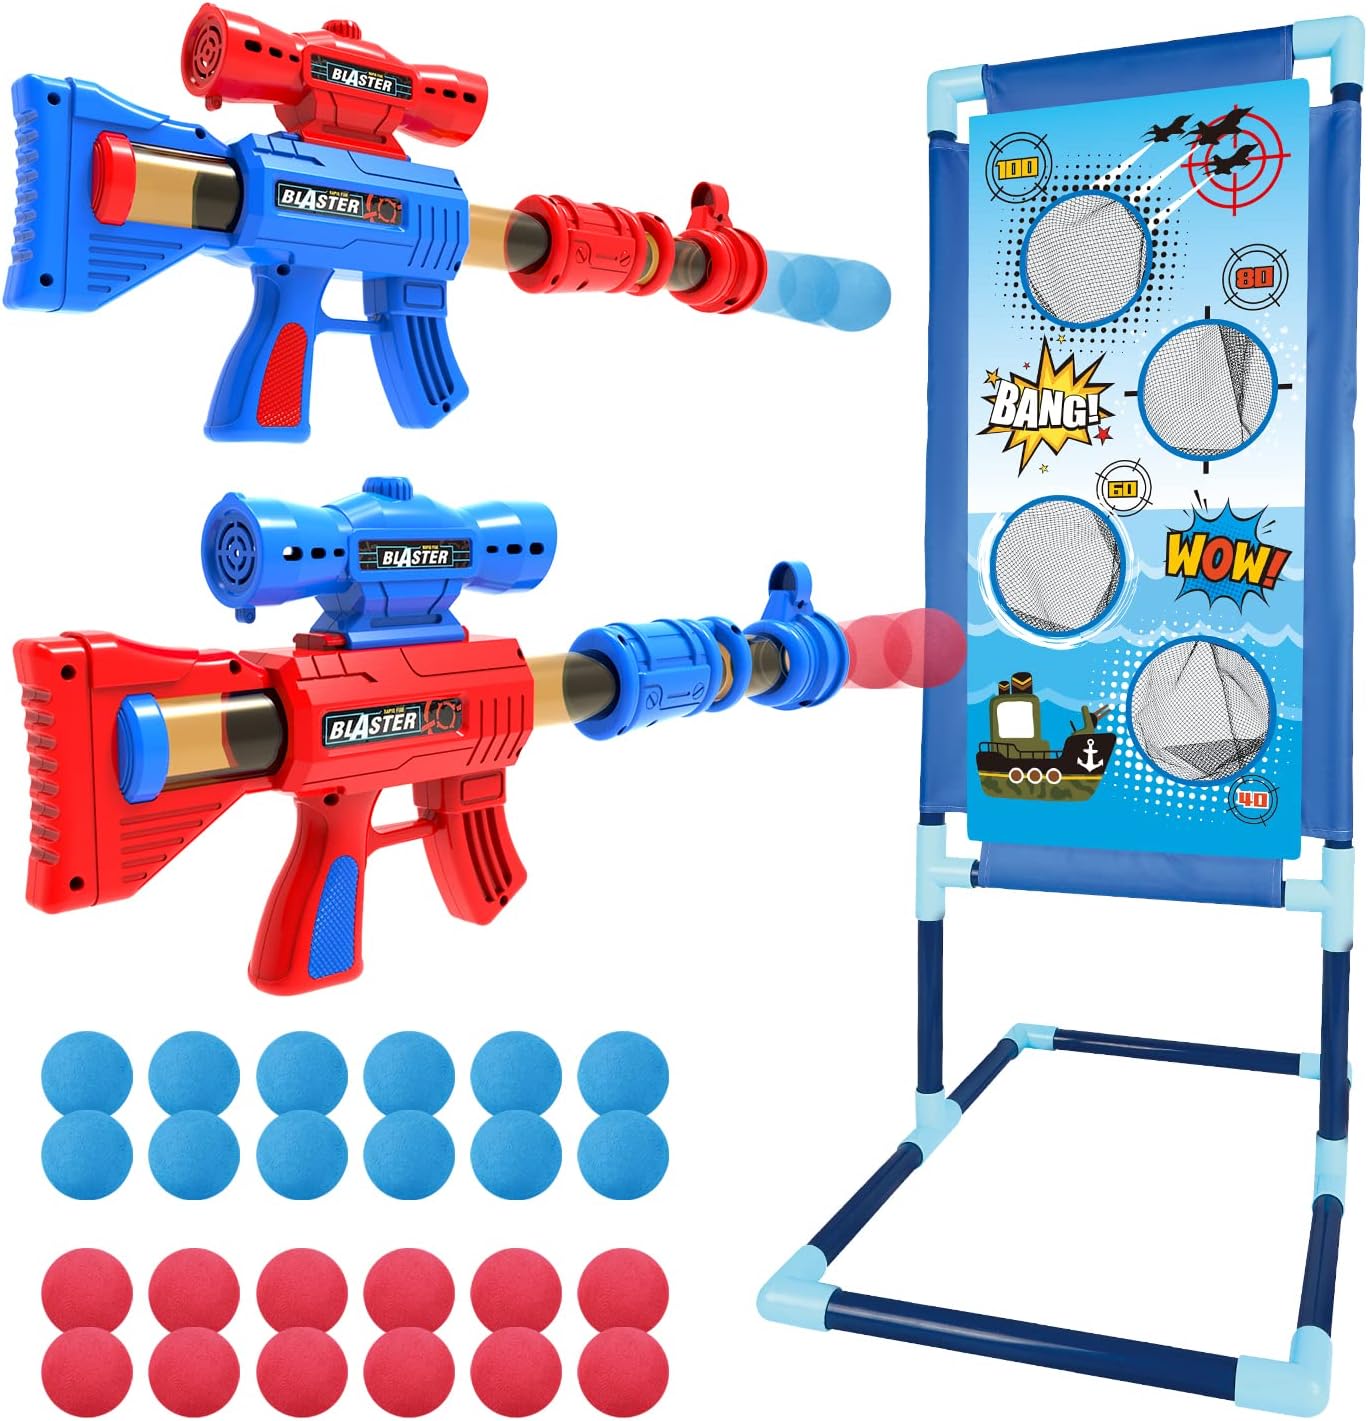 OleFun Shooting Game Toy for Age 6, 7, 8,9,10+ Years Old Kids, Boys - 2 Foam Ball Popper Air Guns & Shooting Target & 24 Foam Balls - Ideal Gift